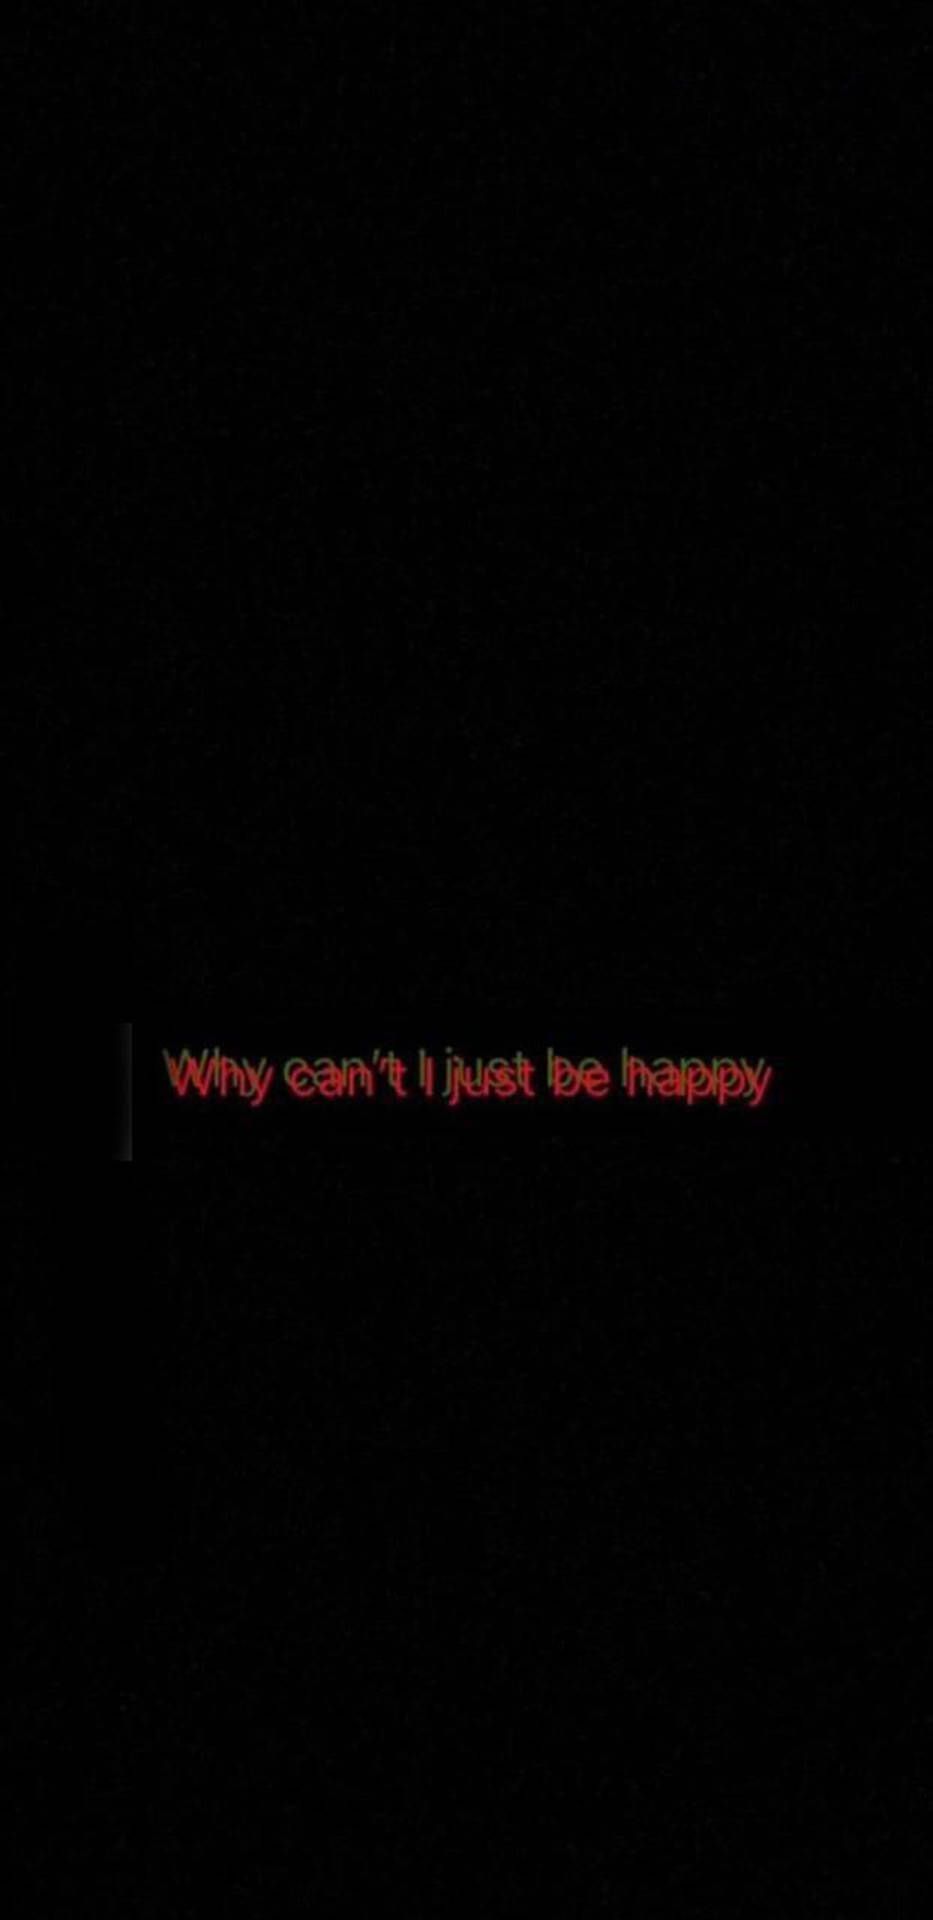 Why can't i just be happy - Dark, depression